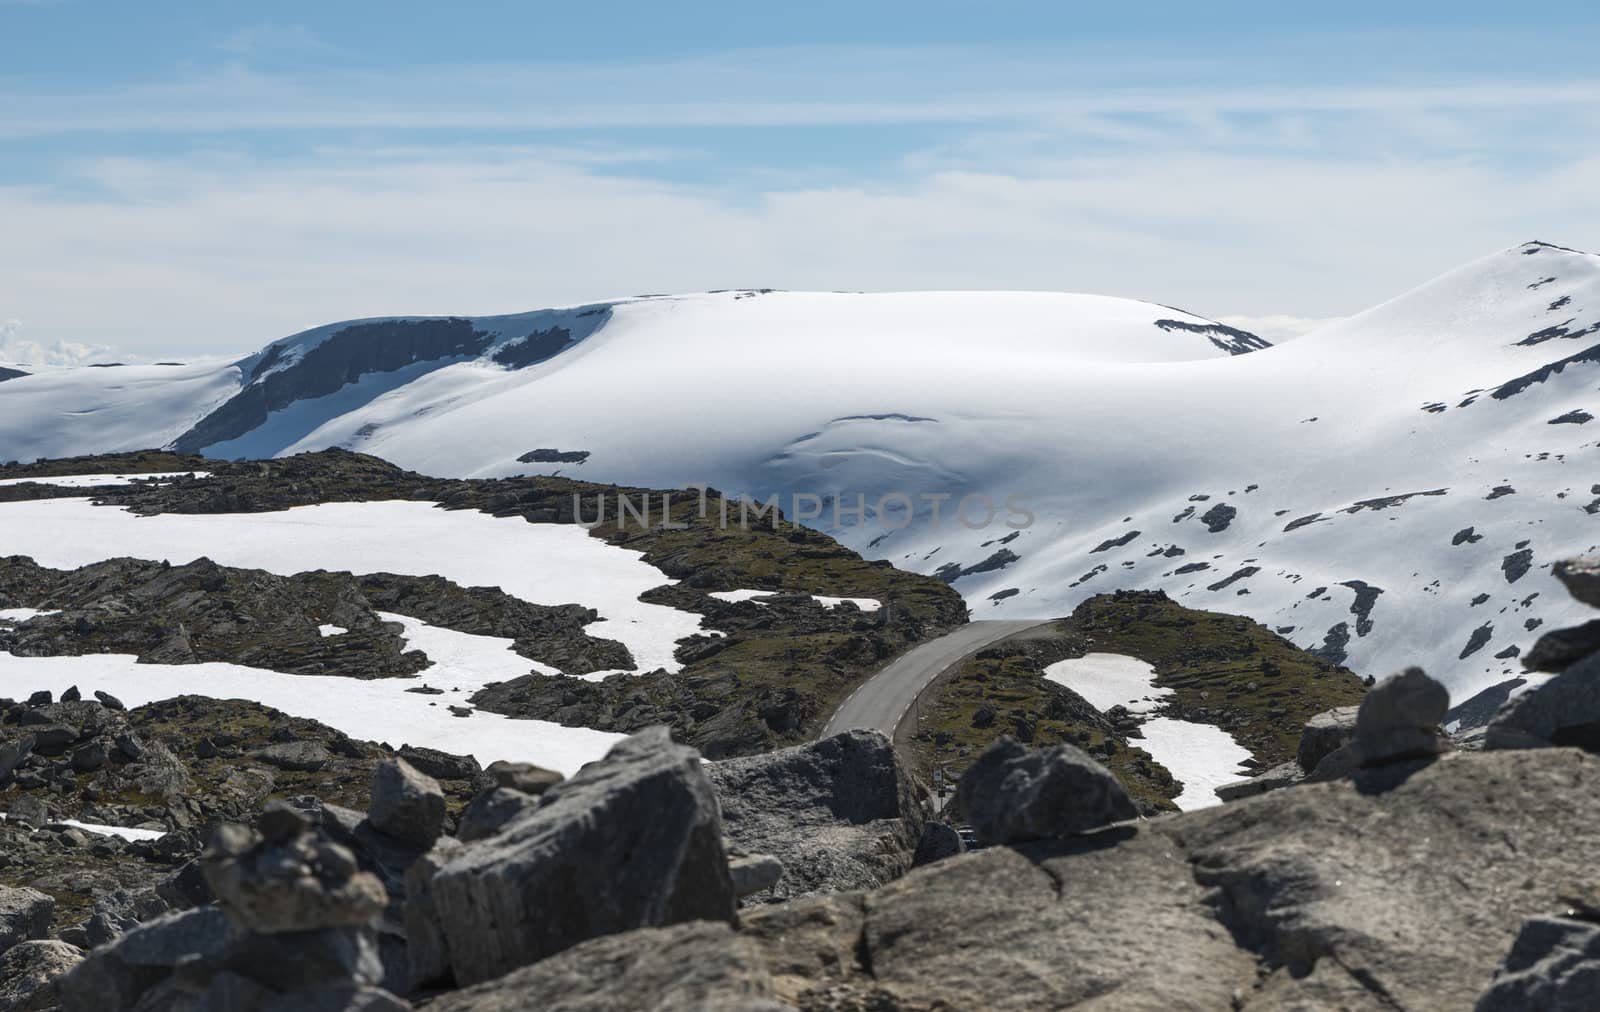 the dalsnibba or road 63 touristic road to the high view of the geirangerfjord in norway with snow in summer on the tops of the mountains